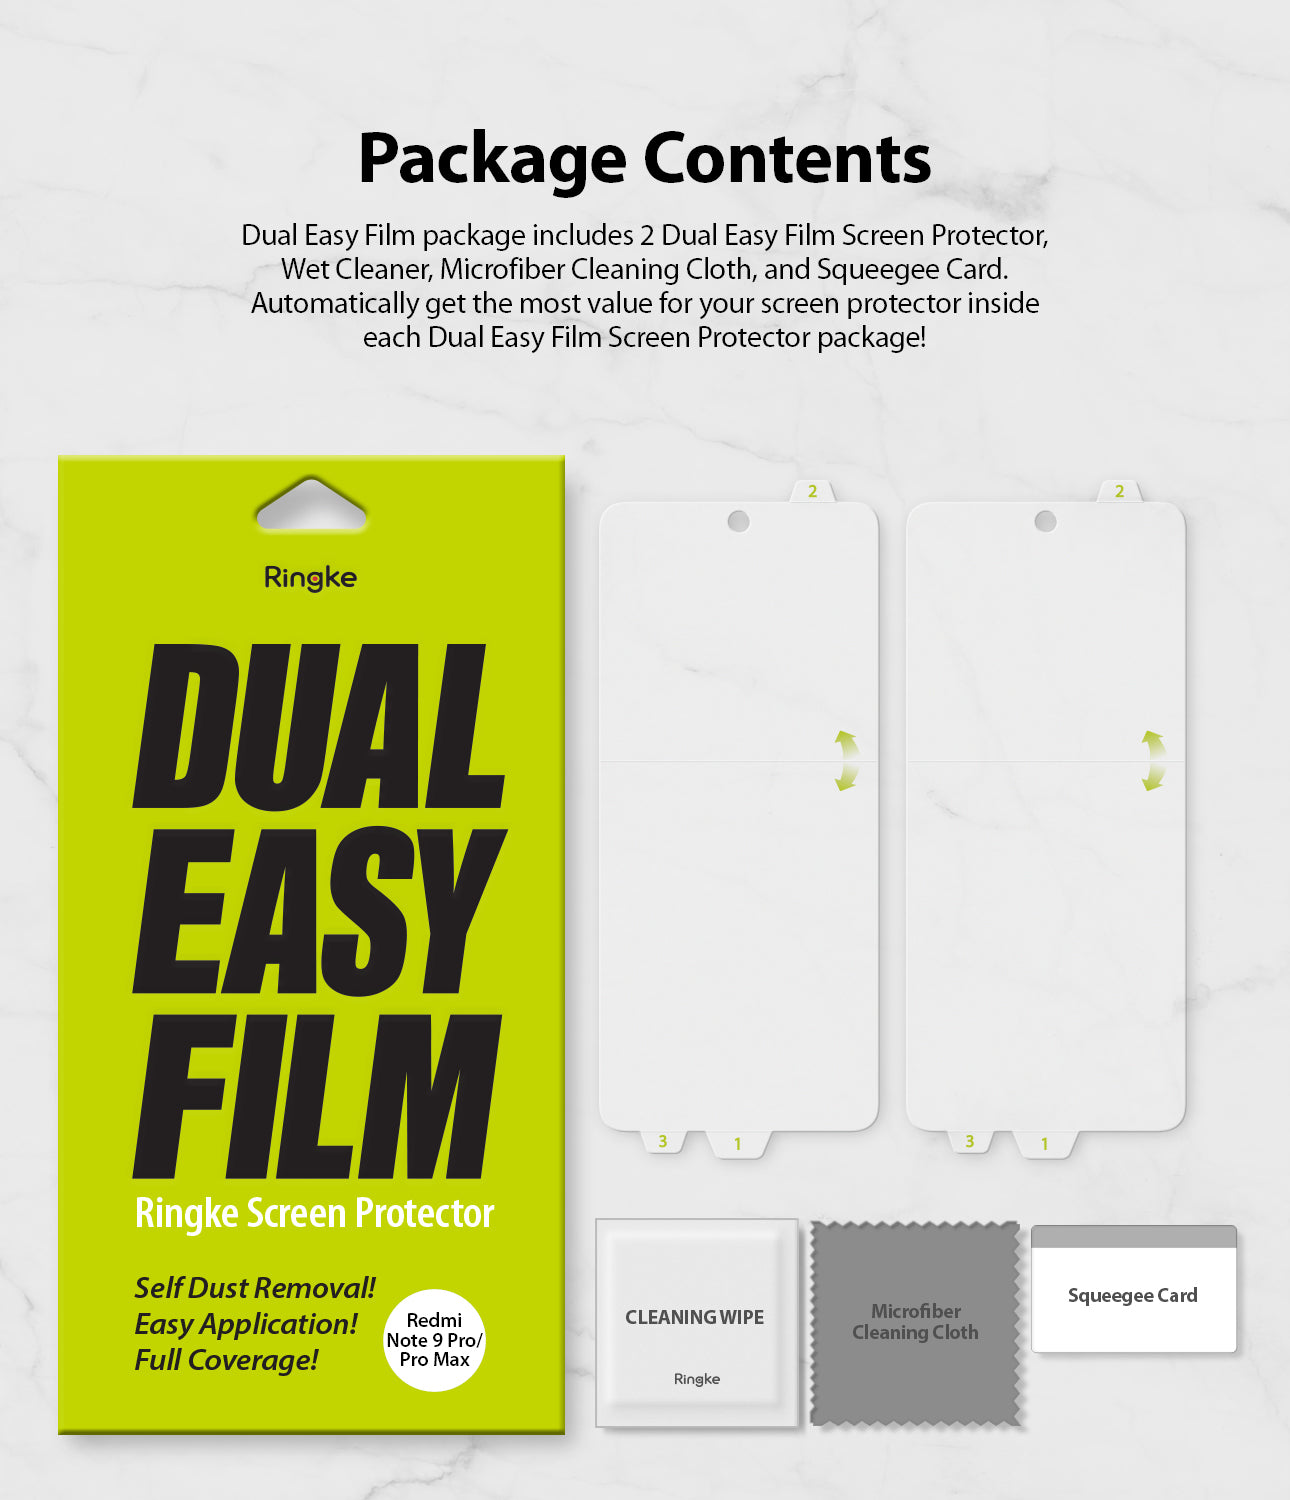 package includes 2 screen protectors